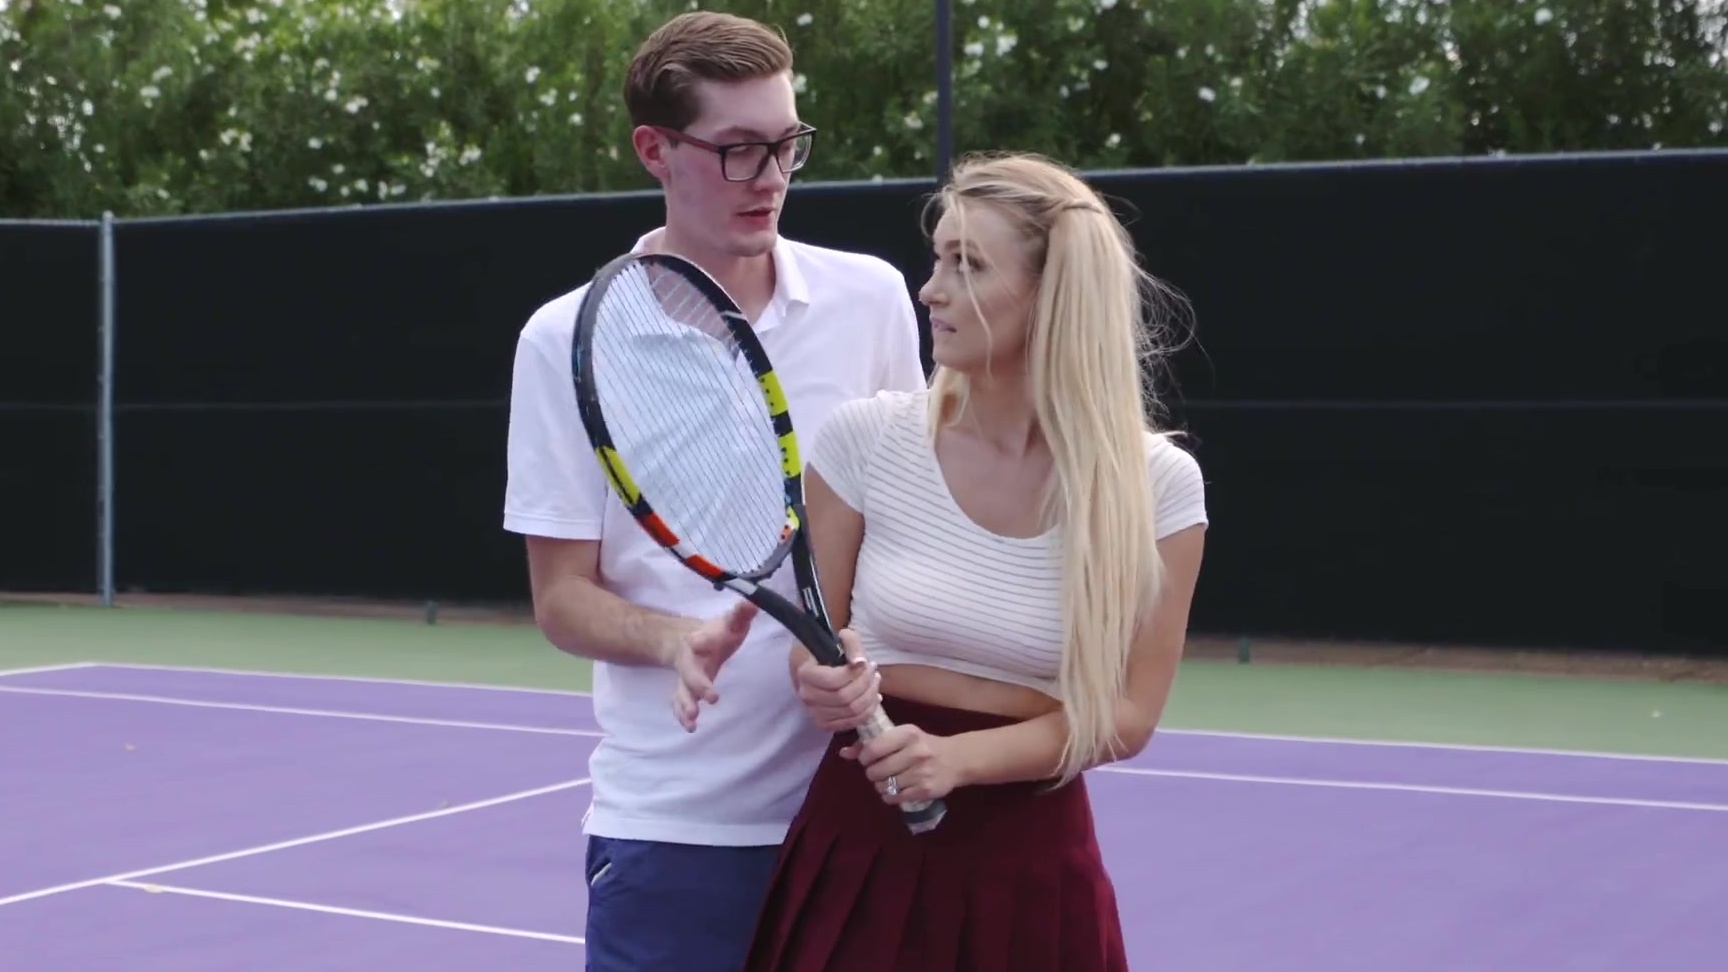 Lord P. S. reccomend teensloveanal busty tennis coach